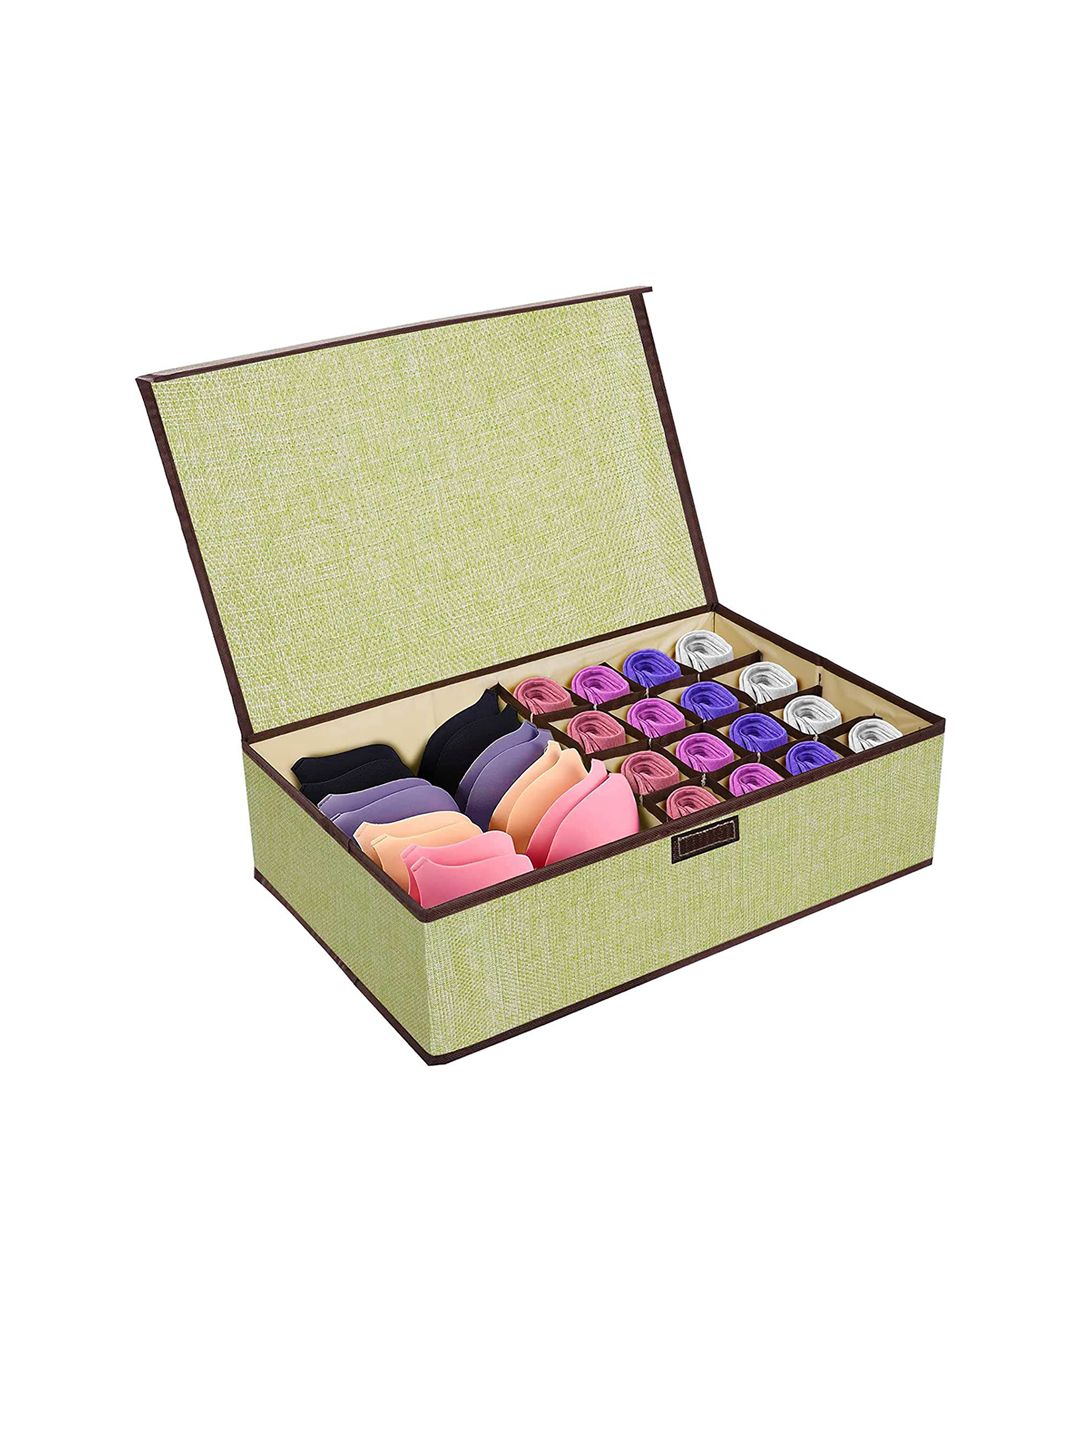 HOUSE OF QUIRK Solid Drawer Organiser Price in India